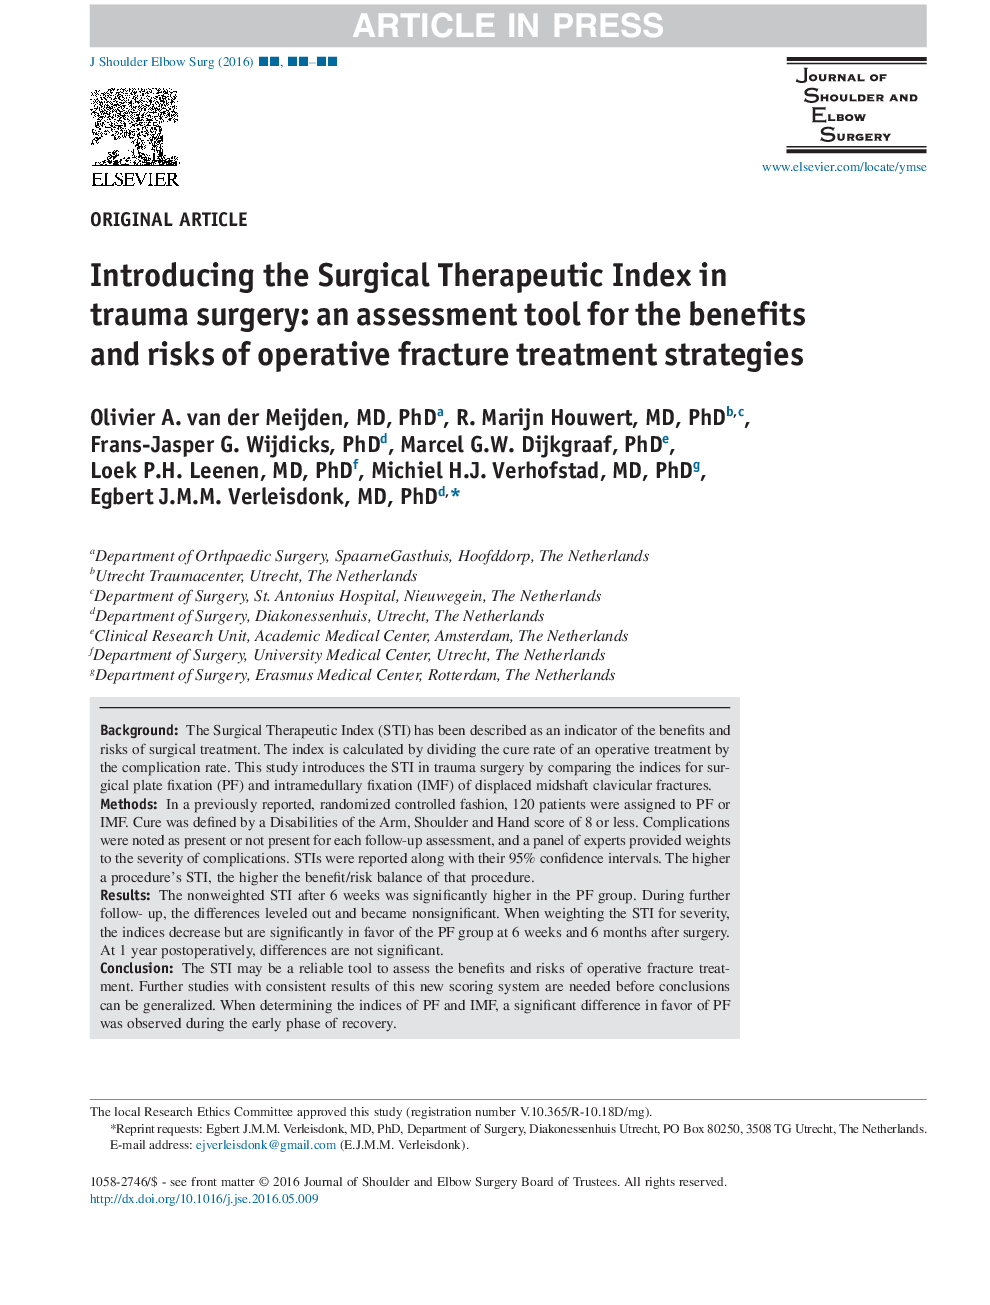 Introducing the Surgical Therapeutic Index in trauma surgery: an assessment tool for the benefits and risks of operative fracture treatment strategies